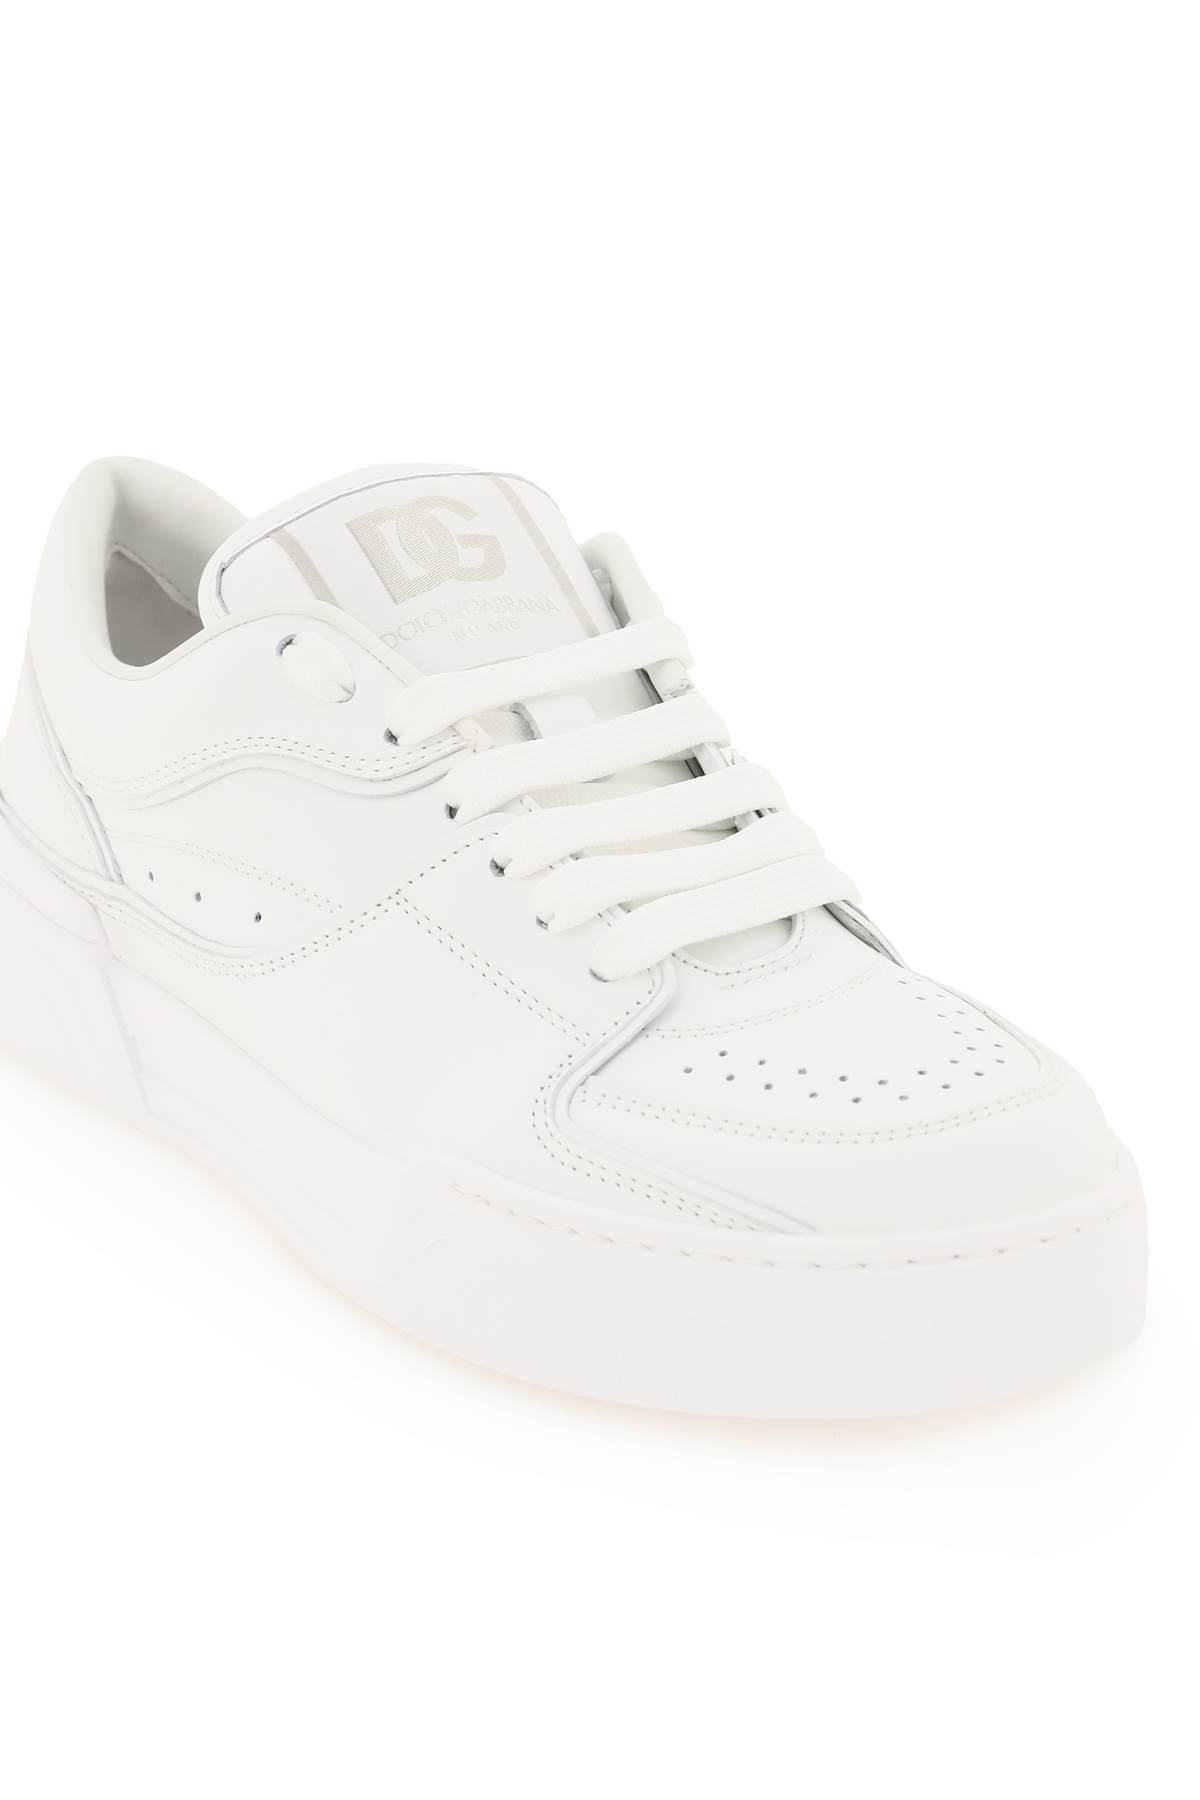 Shop Dolce & Gabbana New Roma Leather Sneakers In Bianco Bianco